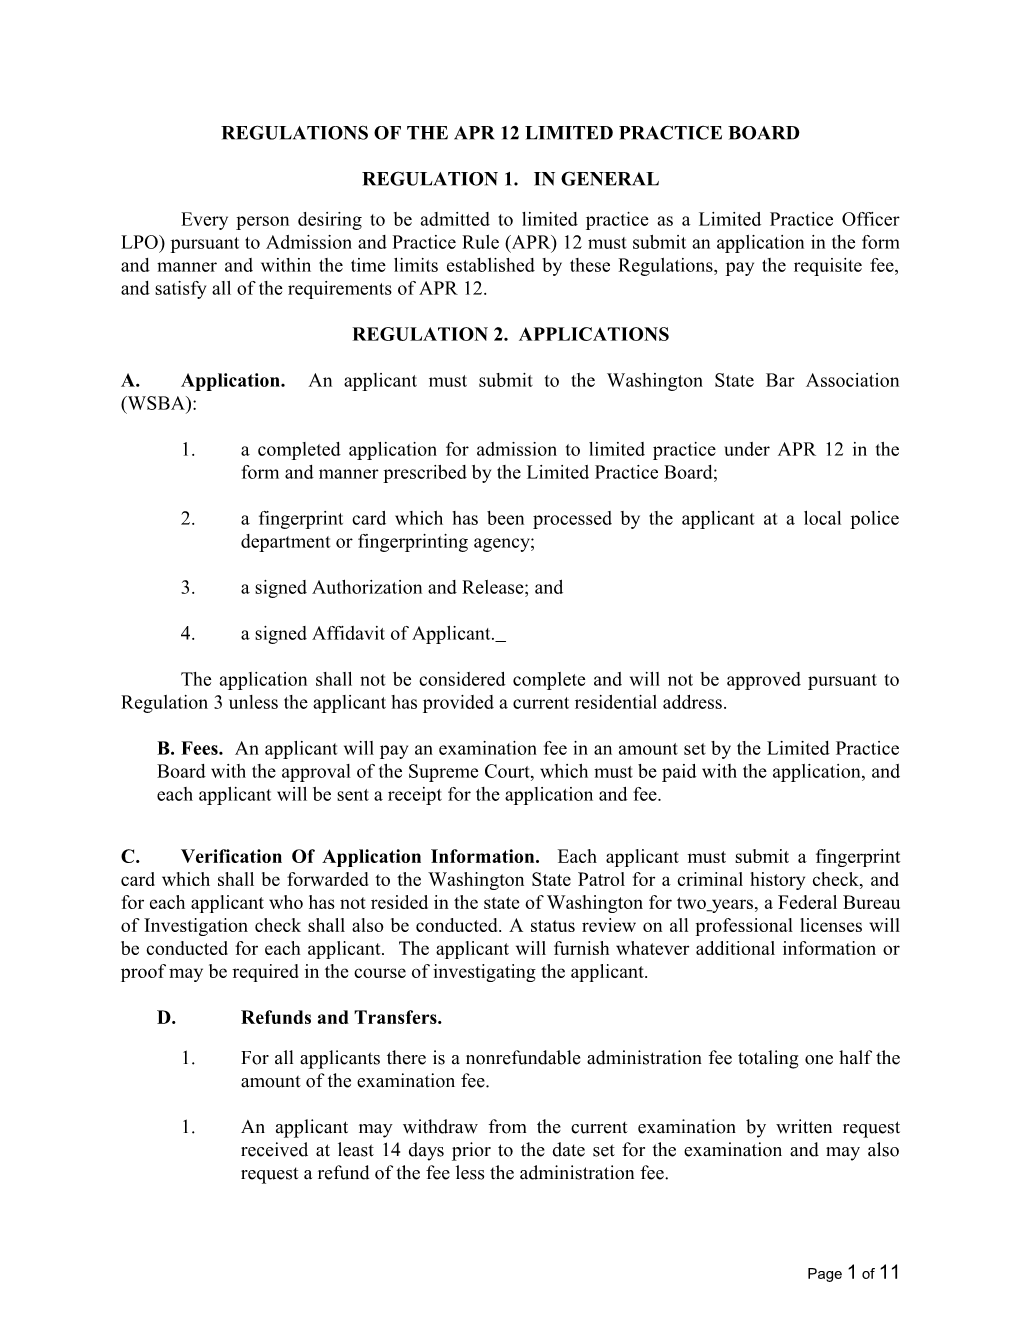 Regulations of the Apr 12 Limited Practice Board